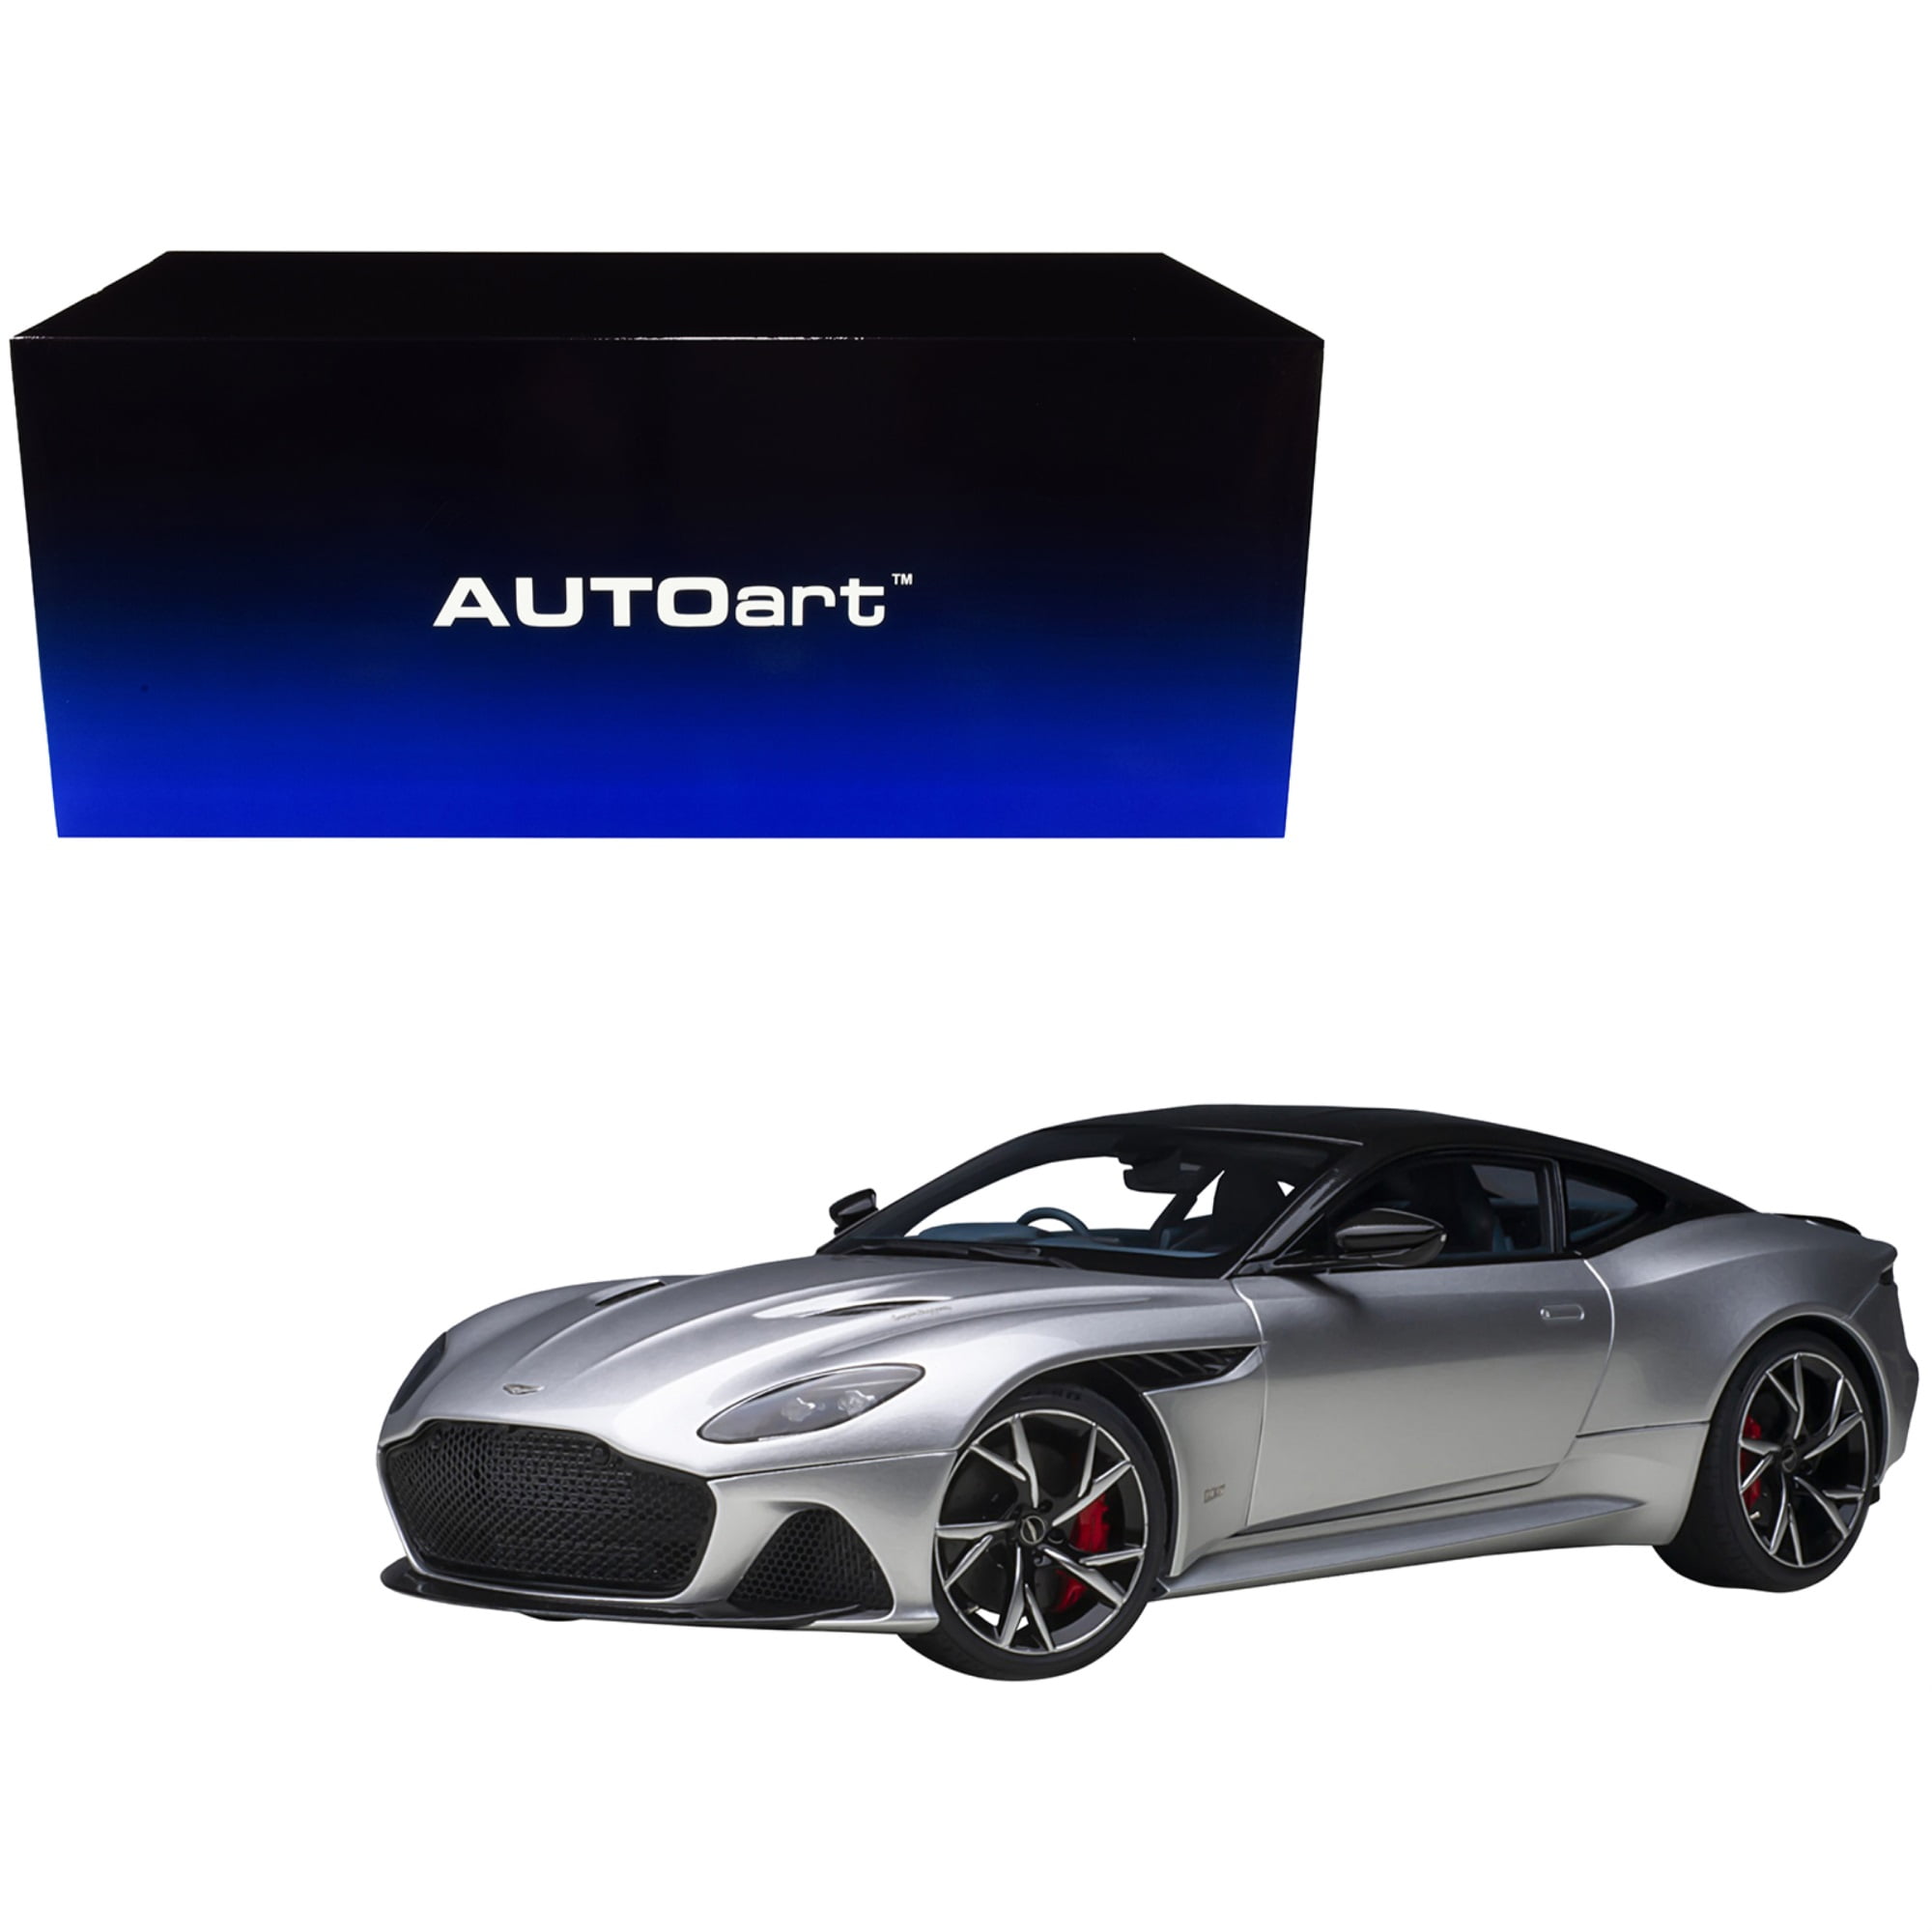 Picture of Autoart 70298 Lightning Silver Metallic with Carbon Top 1 by 18 Scale Model Car for Aston Martin DBS Superleggera RHD